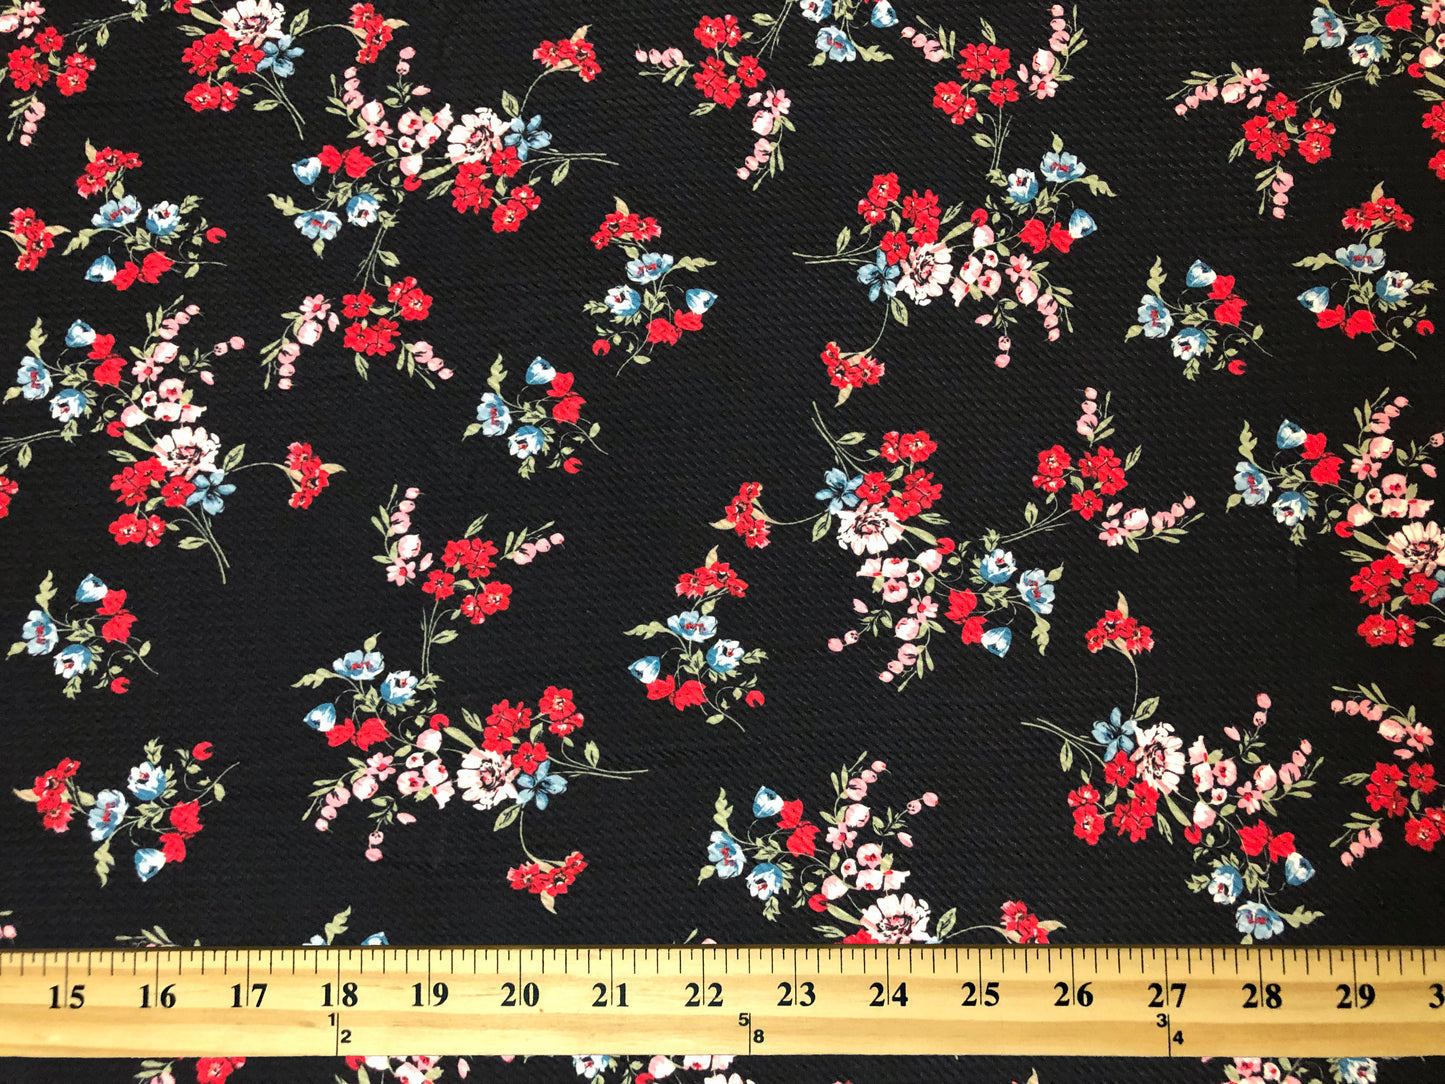 Bullet Knit Printed Fabric-Black Red Flowers-BPR269-Sold by the Yard